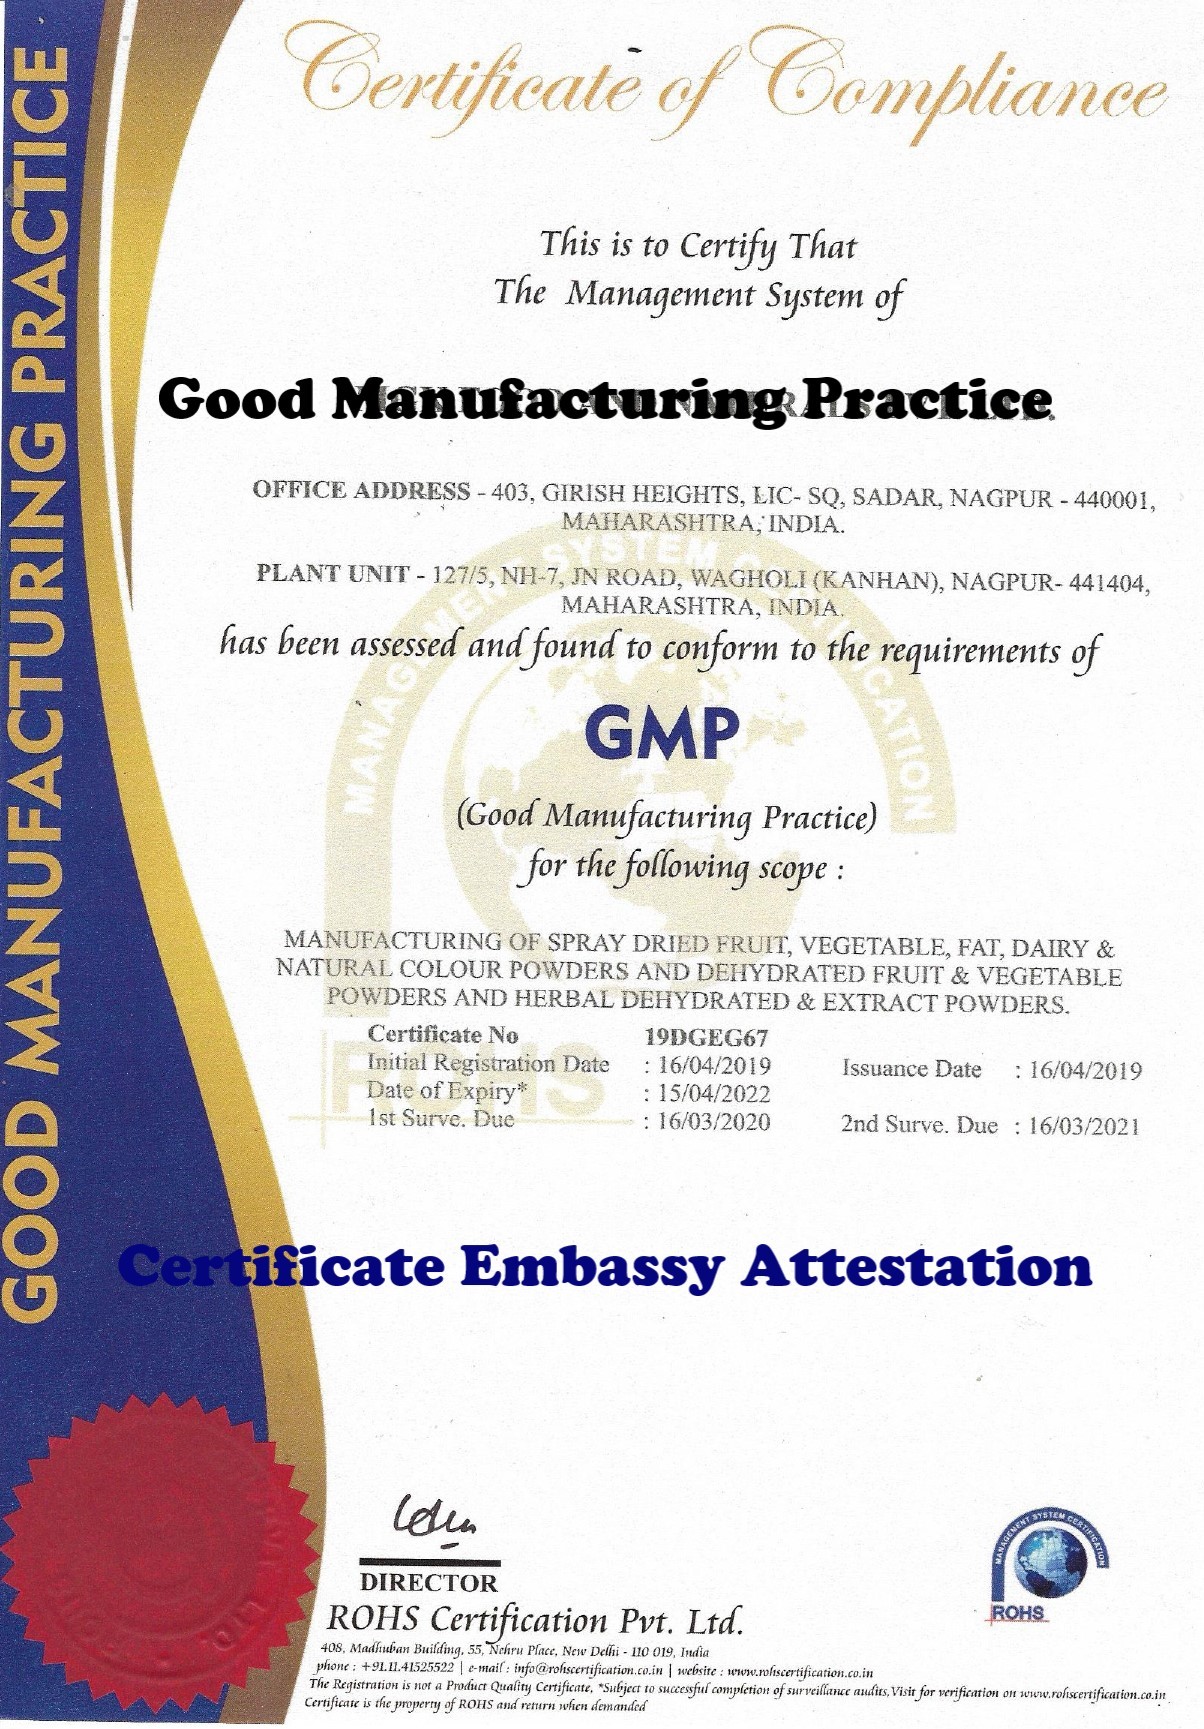 GMP Certificate Attestation from Qatar Embassy